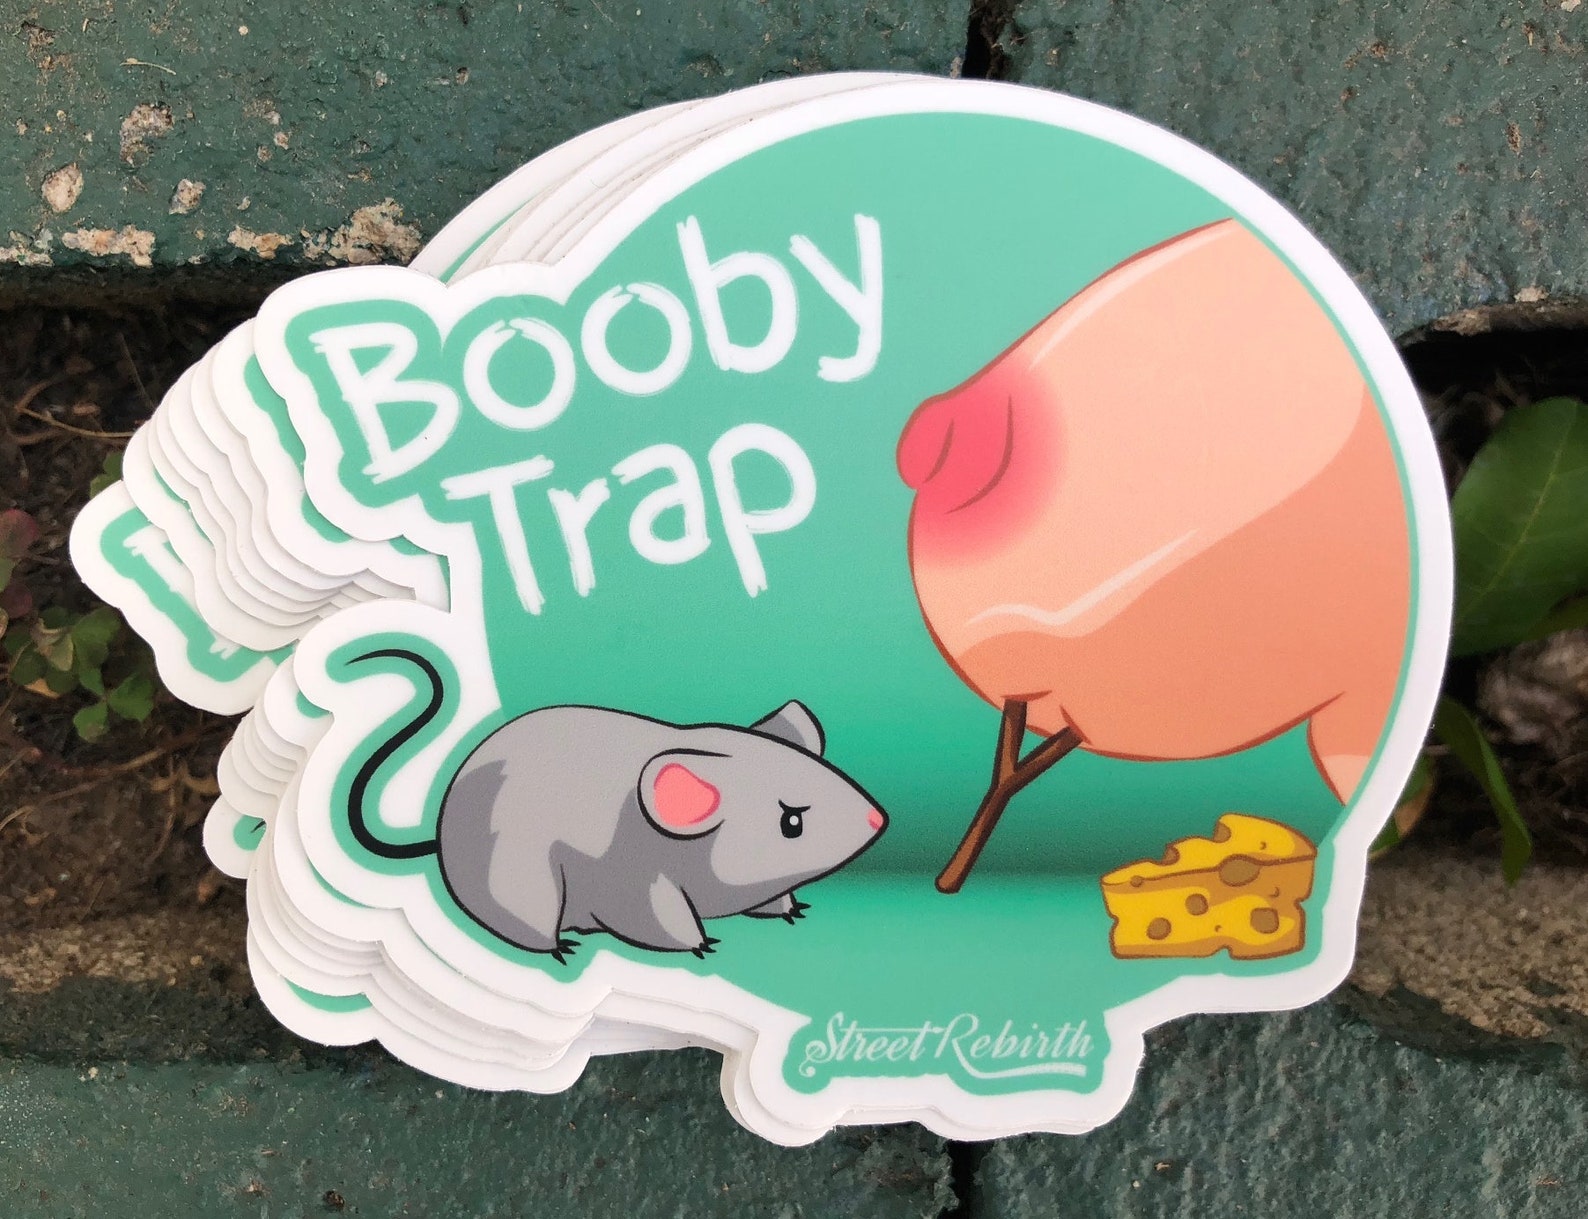 Booby Trap. Bob Saget - Booby Trap. R6 Booby Trap. Трэп Стикеры. Booby trapping